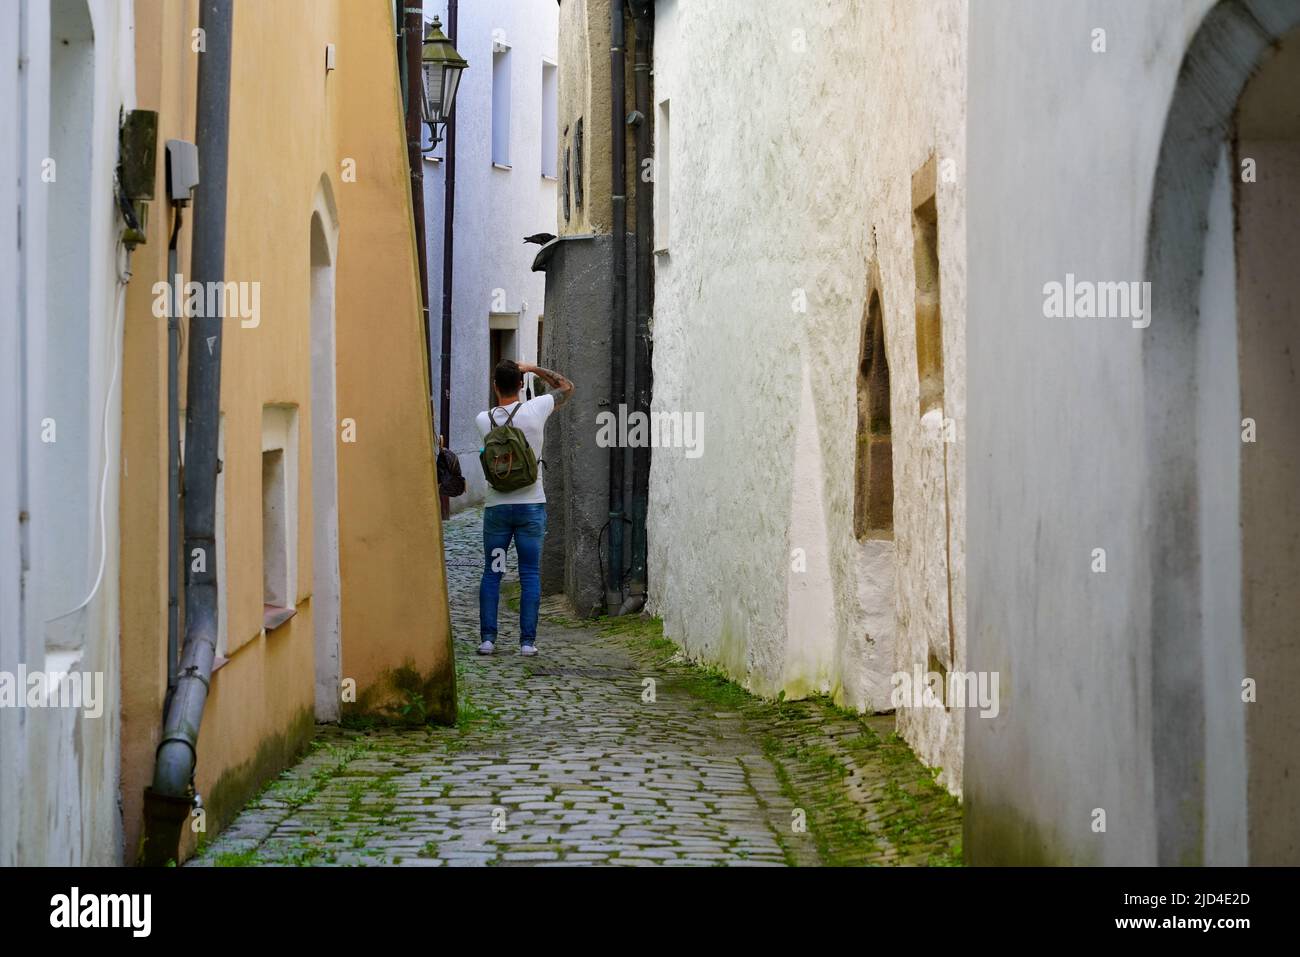 A tourist takes a photo in a small alley in the old town of Passau, Bavaria, Germany, 11.6.22 Stock Photo